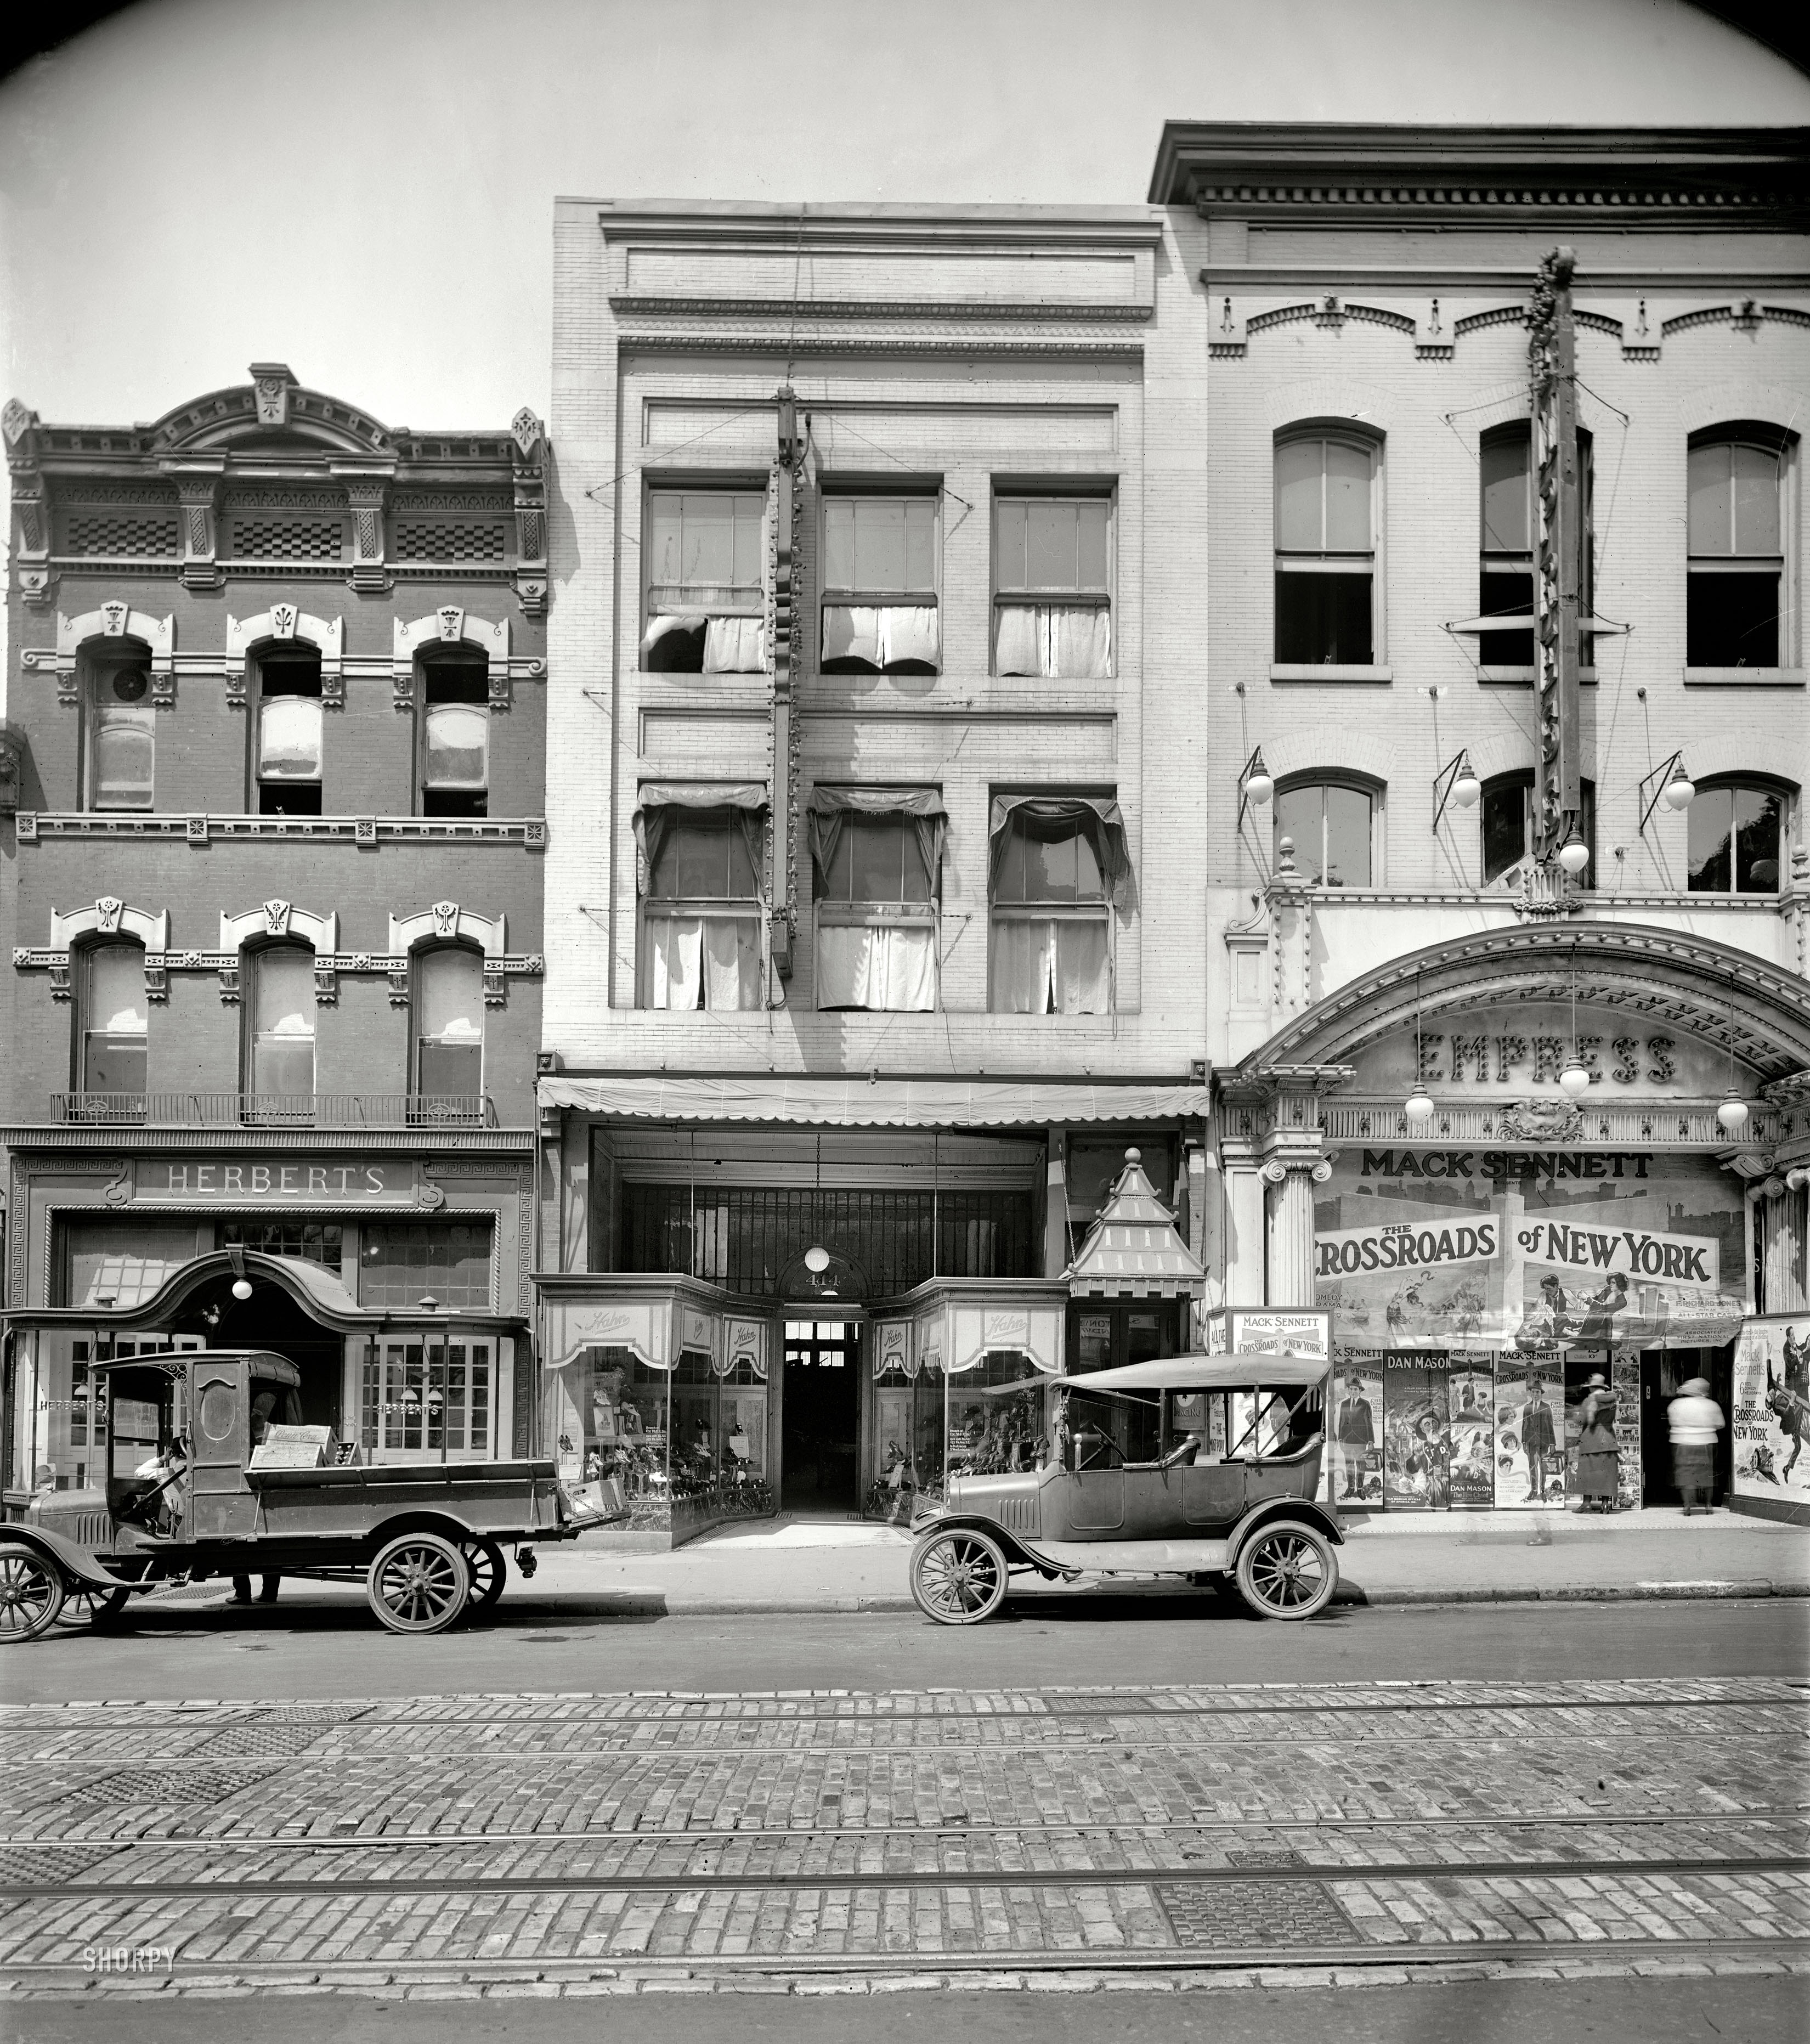 Washington, D.C., circa 1922. "Hahn's shoe store, 414 Ninth Street N.W." Next door to the Empress Theater, where Mack Sennett's "Crossroads of New York" is playing. National Photo Company Collection glass negative. View full size.